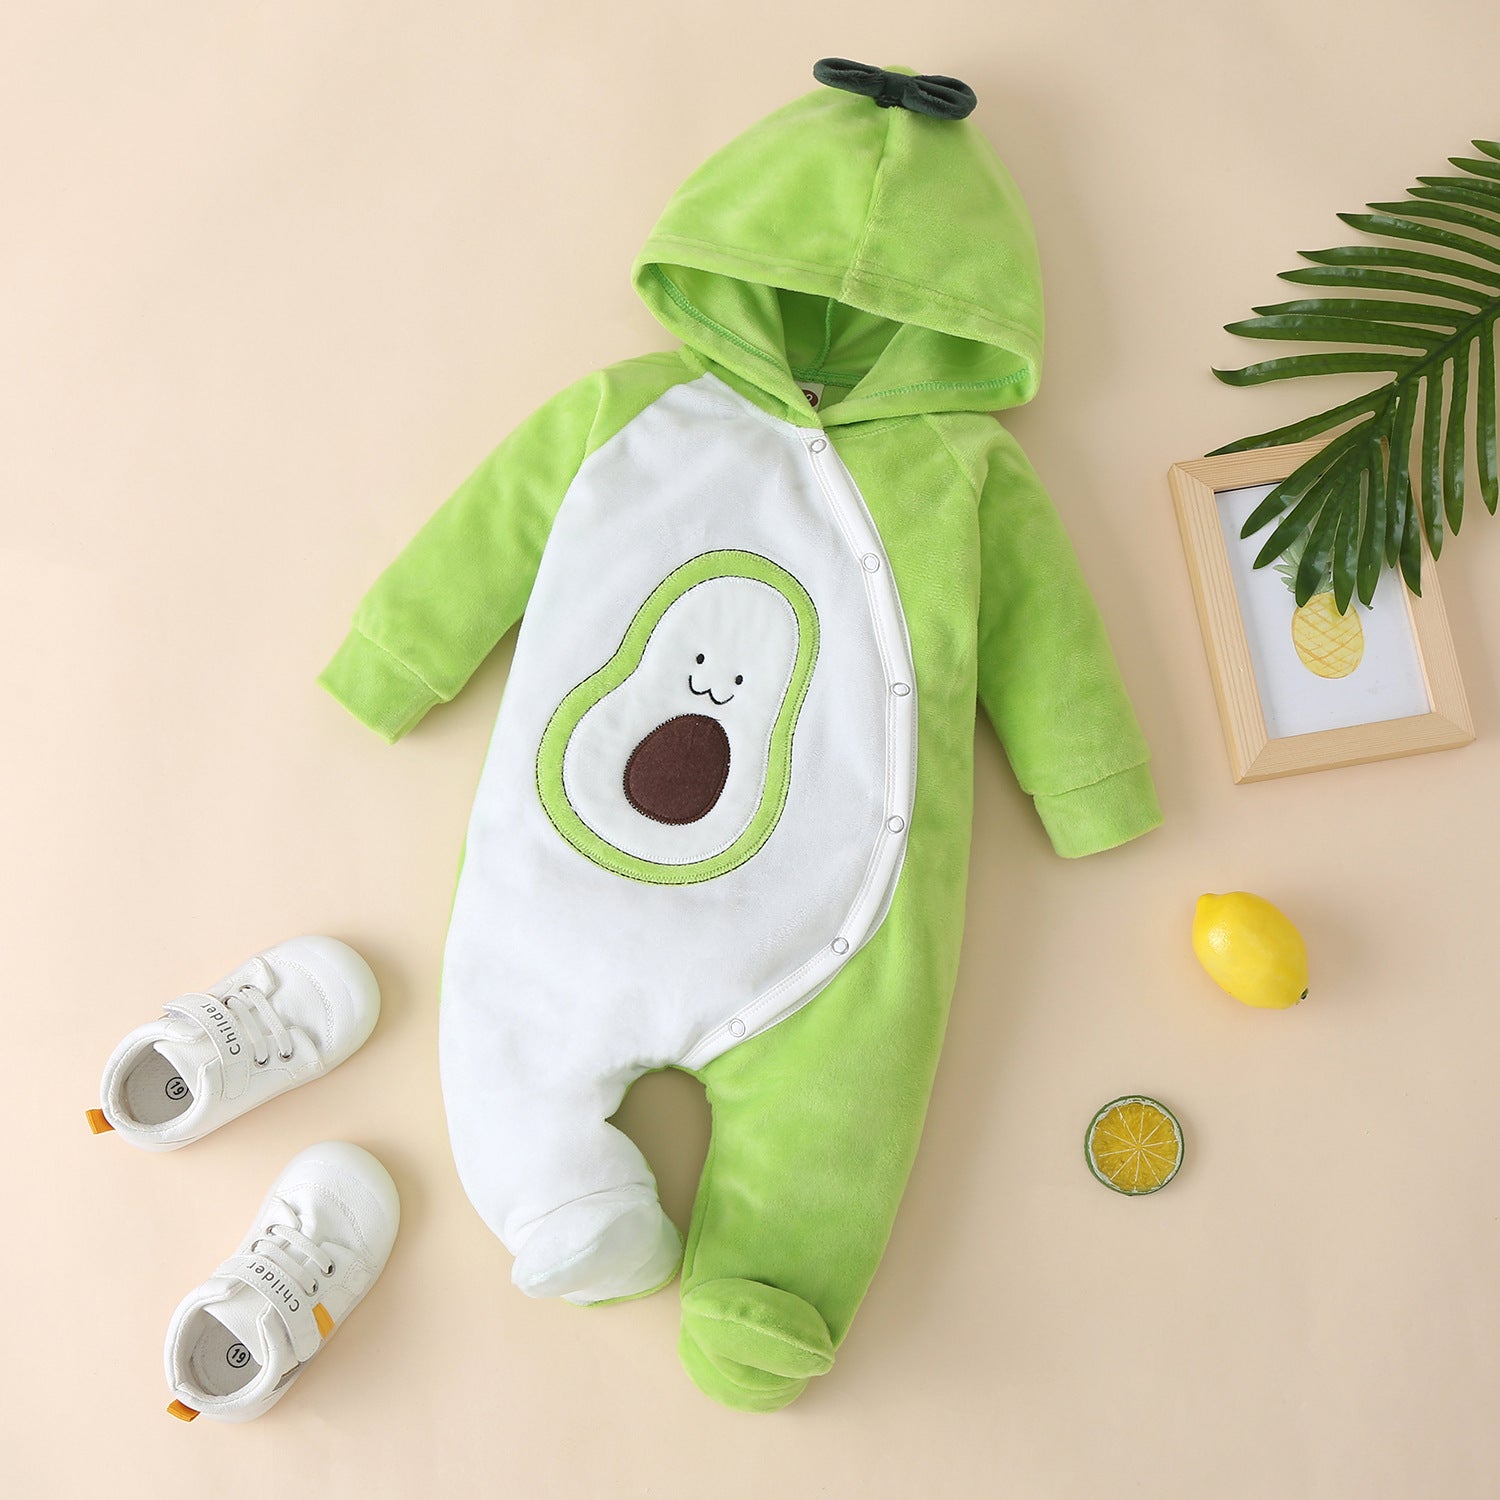 Baby Essentials  Newborn Baby Products – TheToddly